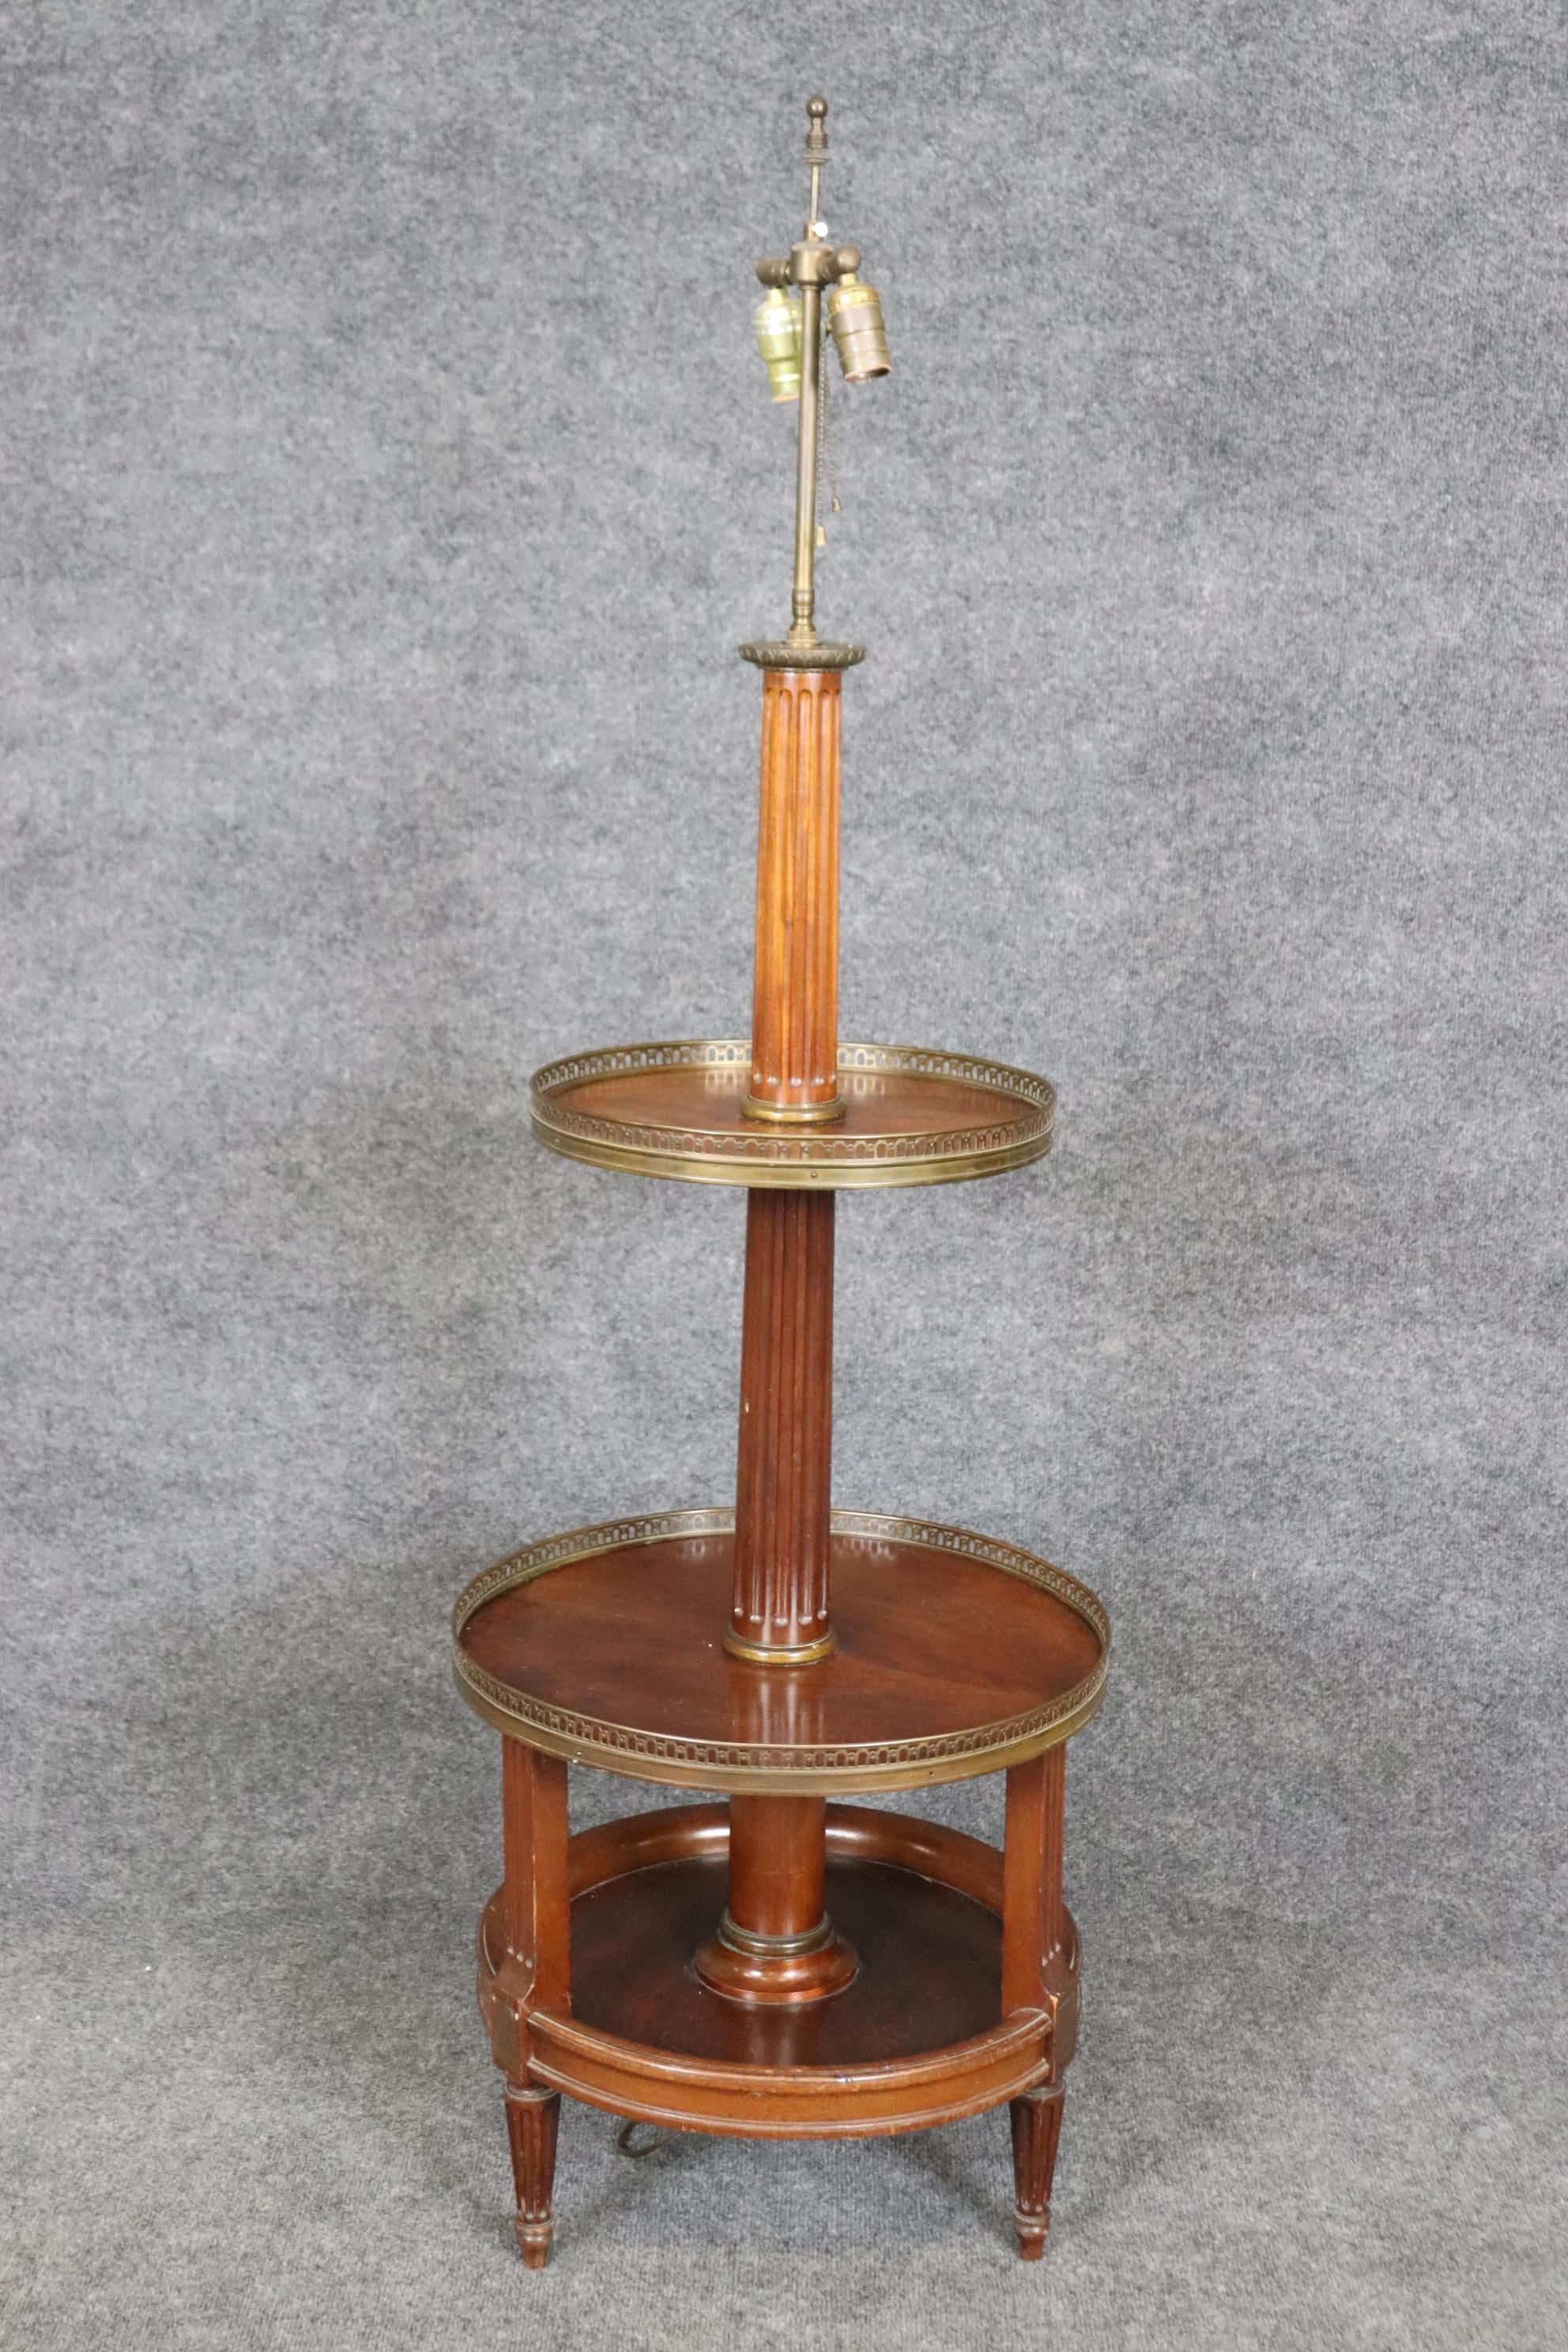 French Directoire Mahogany and Brass Mounted Floor Lamp with Shelves In Good Condition For Sale In Swedesboro, NJ